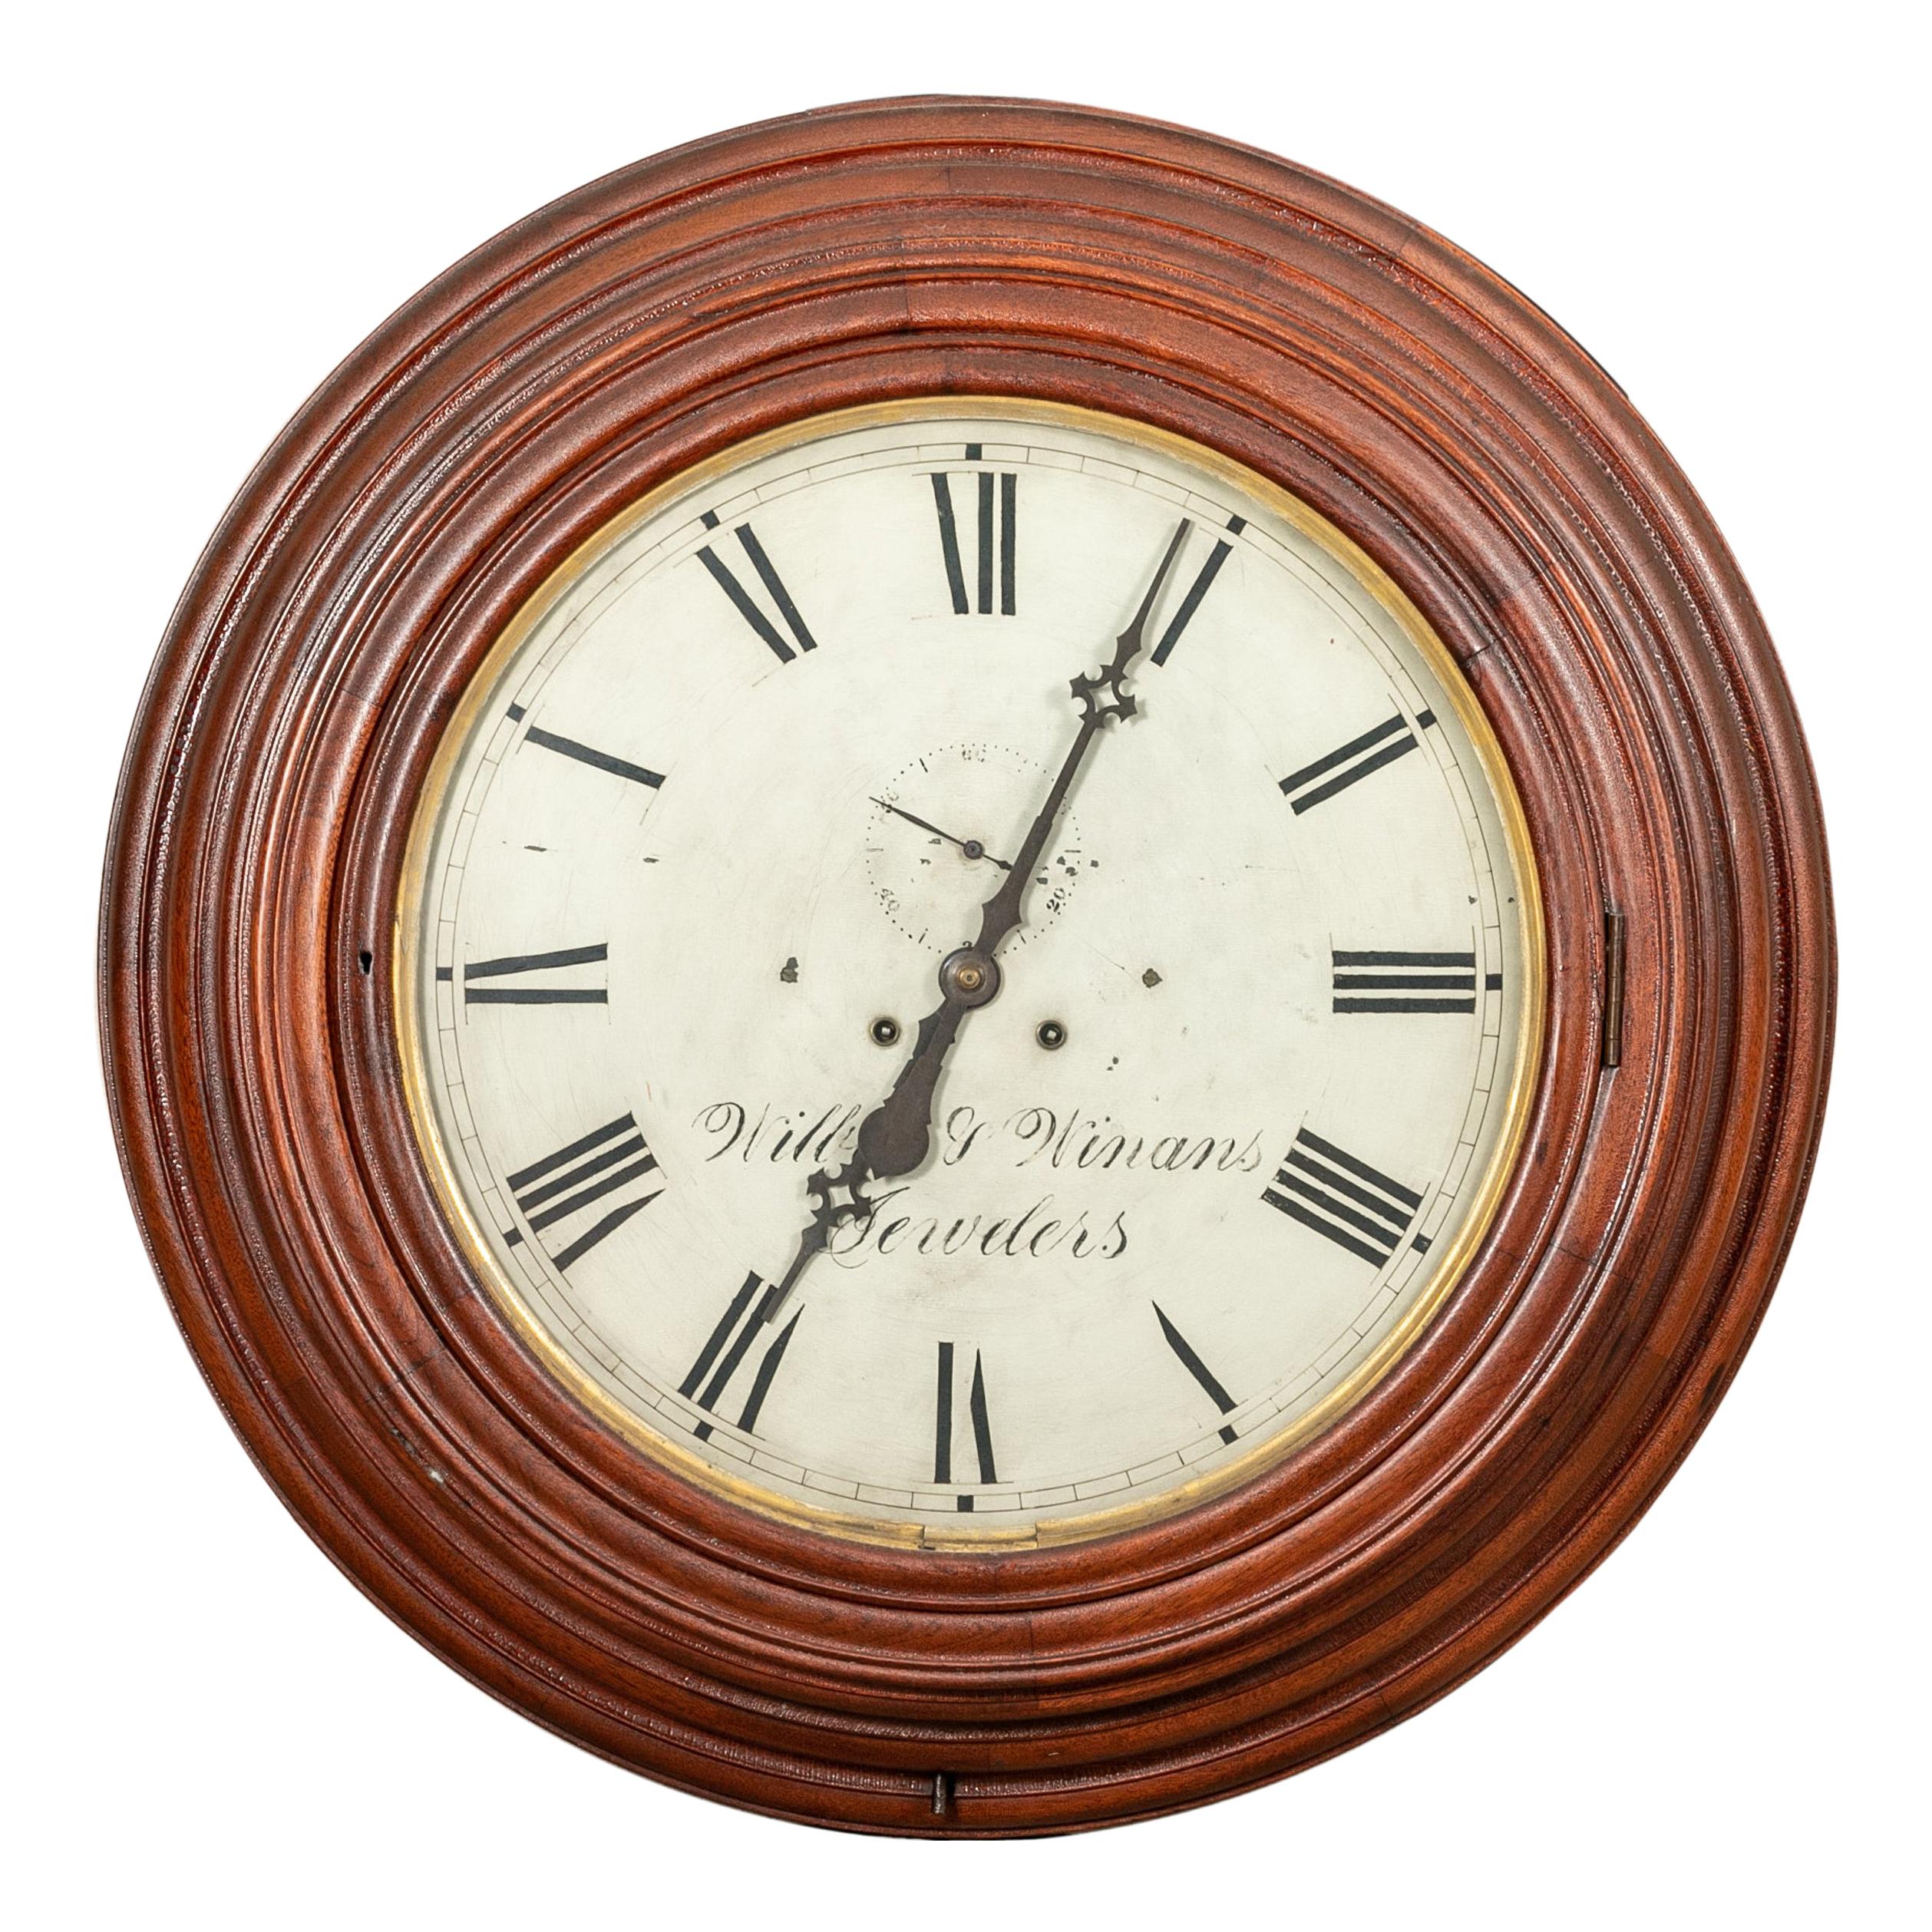 Antique Carved Circular Wall Clock by Wilbur V. Wigans Jewelers For Sale